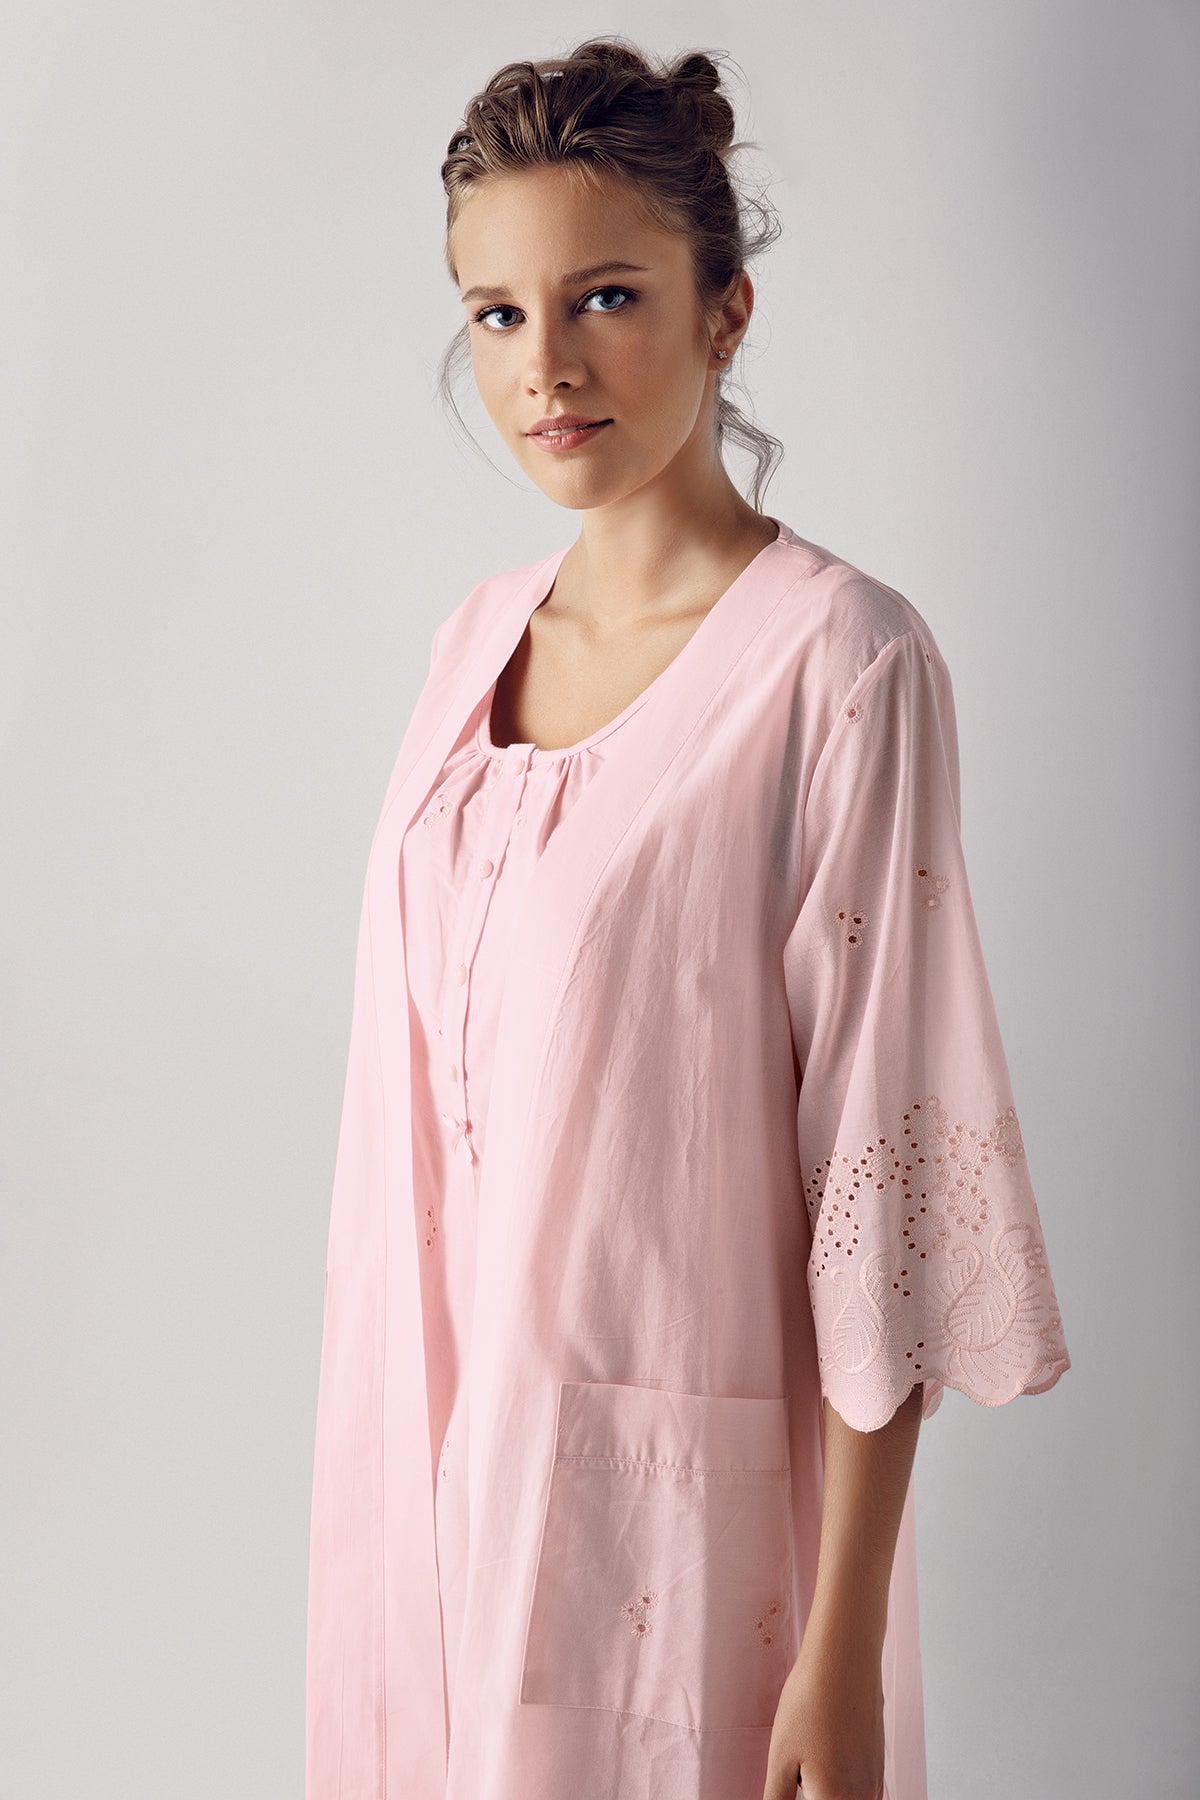 Shopymommy 10402 Cotton Weaving Maternity & Nursing Nightgown With Robe Powder